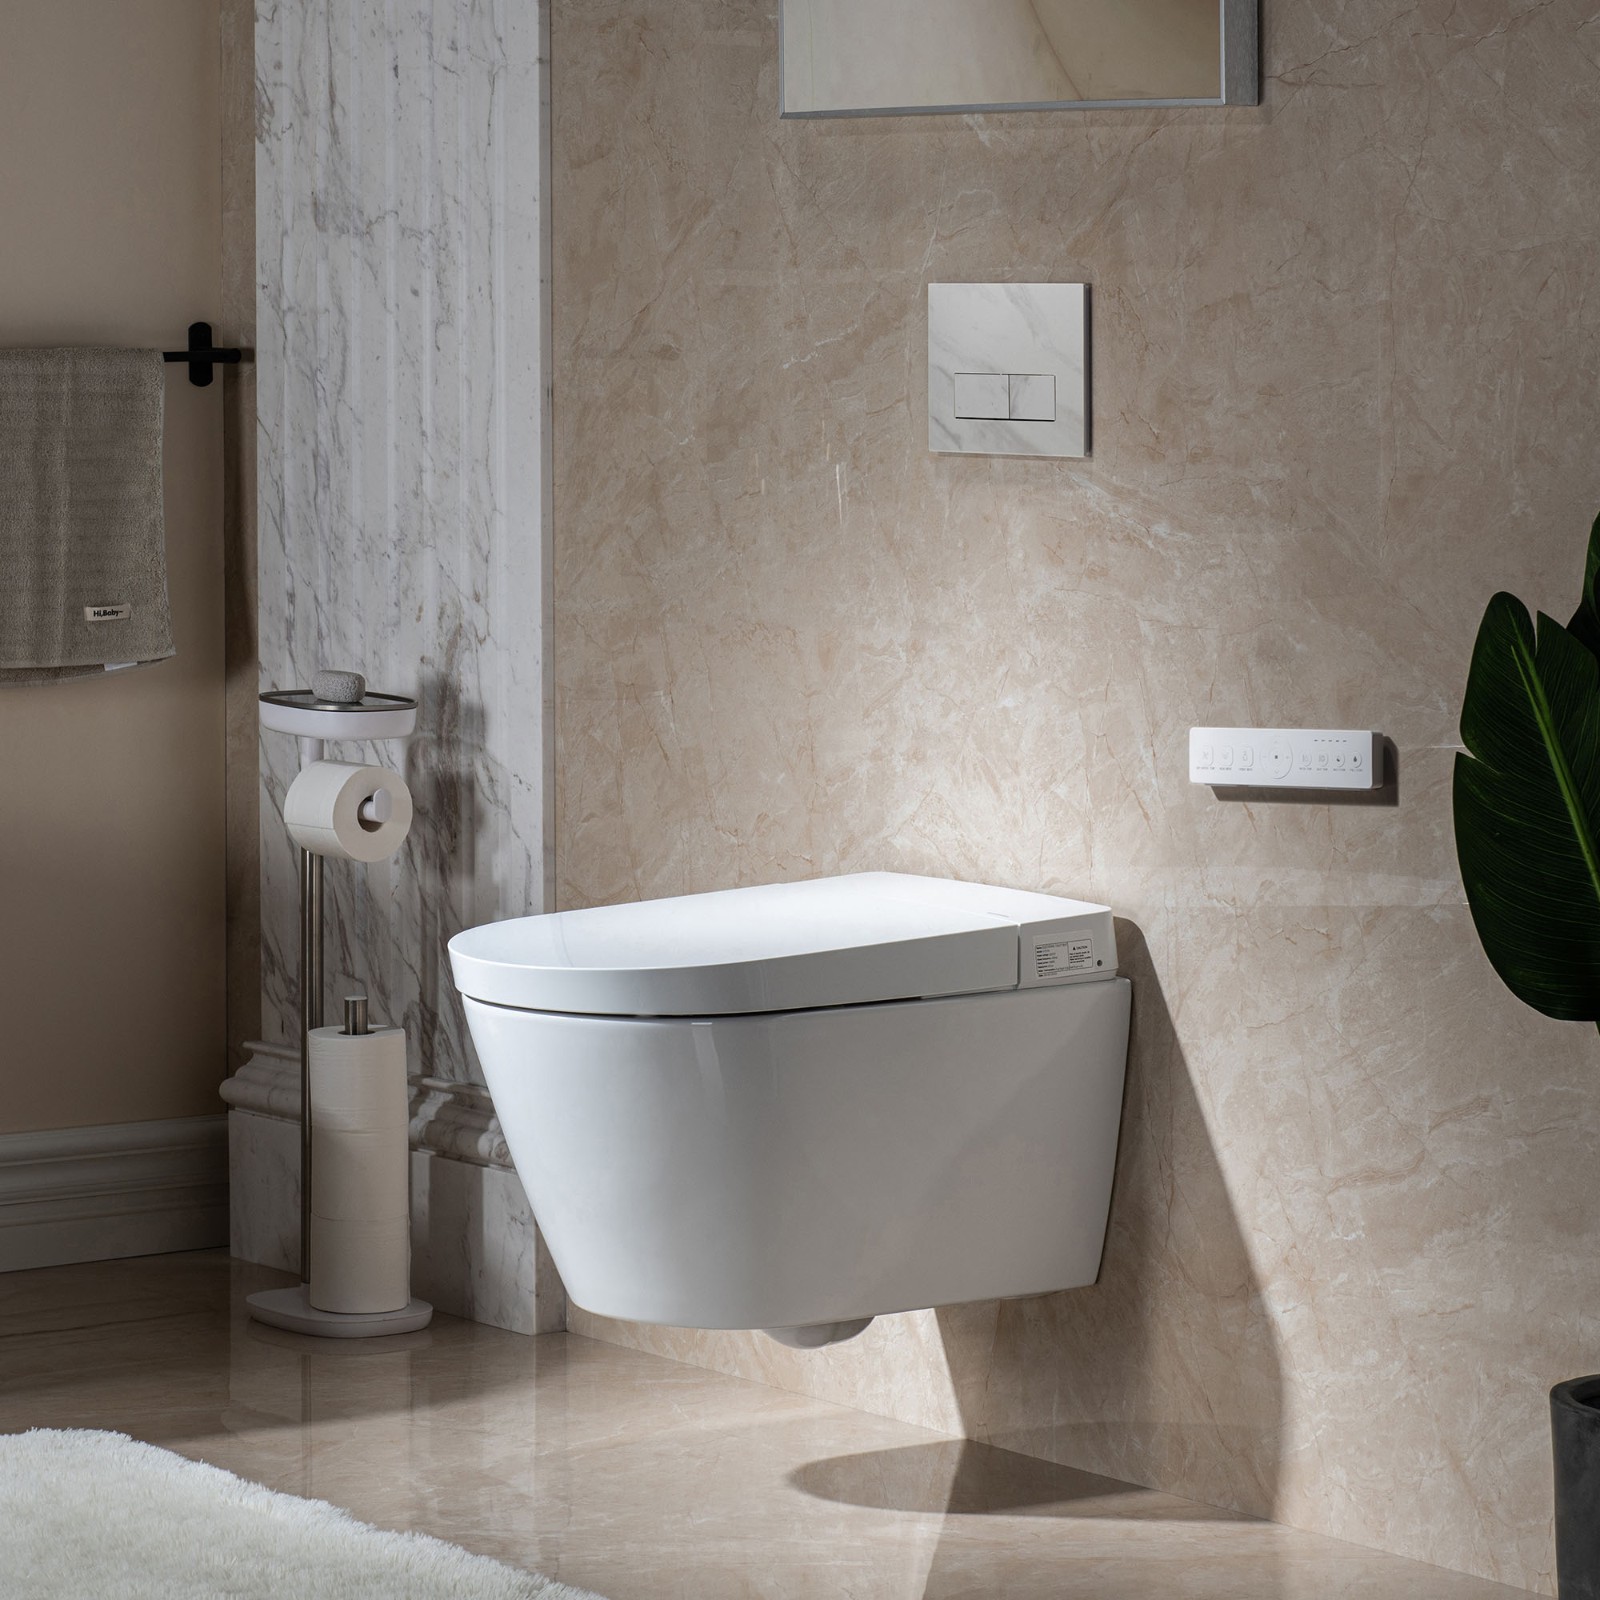  WOODBRIDGE  Intelligent Compact Elongated Dual-flush wall hung toilet with Bidet Wash Function, Heated Seat & Dryer. Matching Concealed Tank system and White Marble Stone Slim Flush Plates Included.LT611 + SWHT611+FP611-WH_548